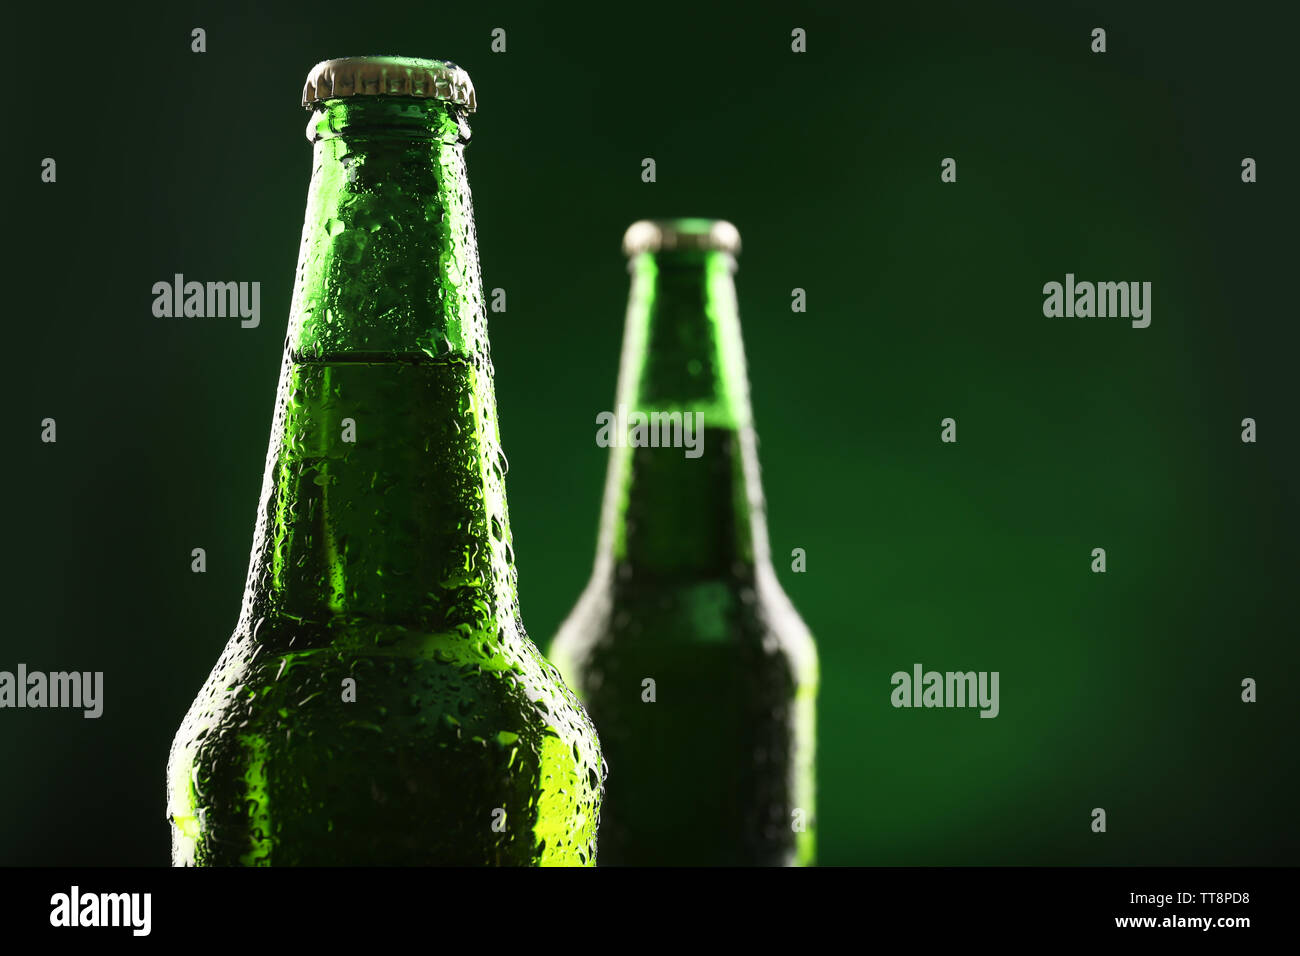 Download Glass Bottles Of Beer On Dark Green Background Stock Photo Alamy Yellowimages Mockups